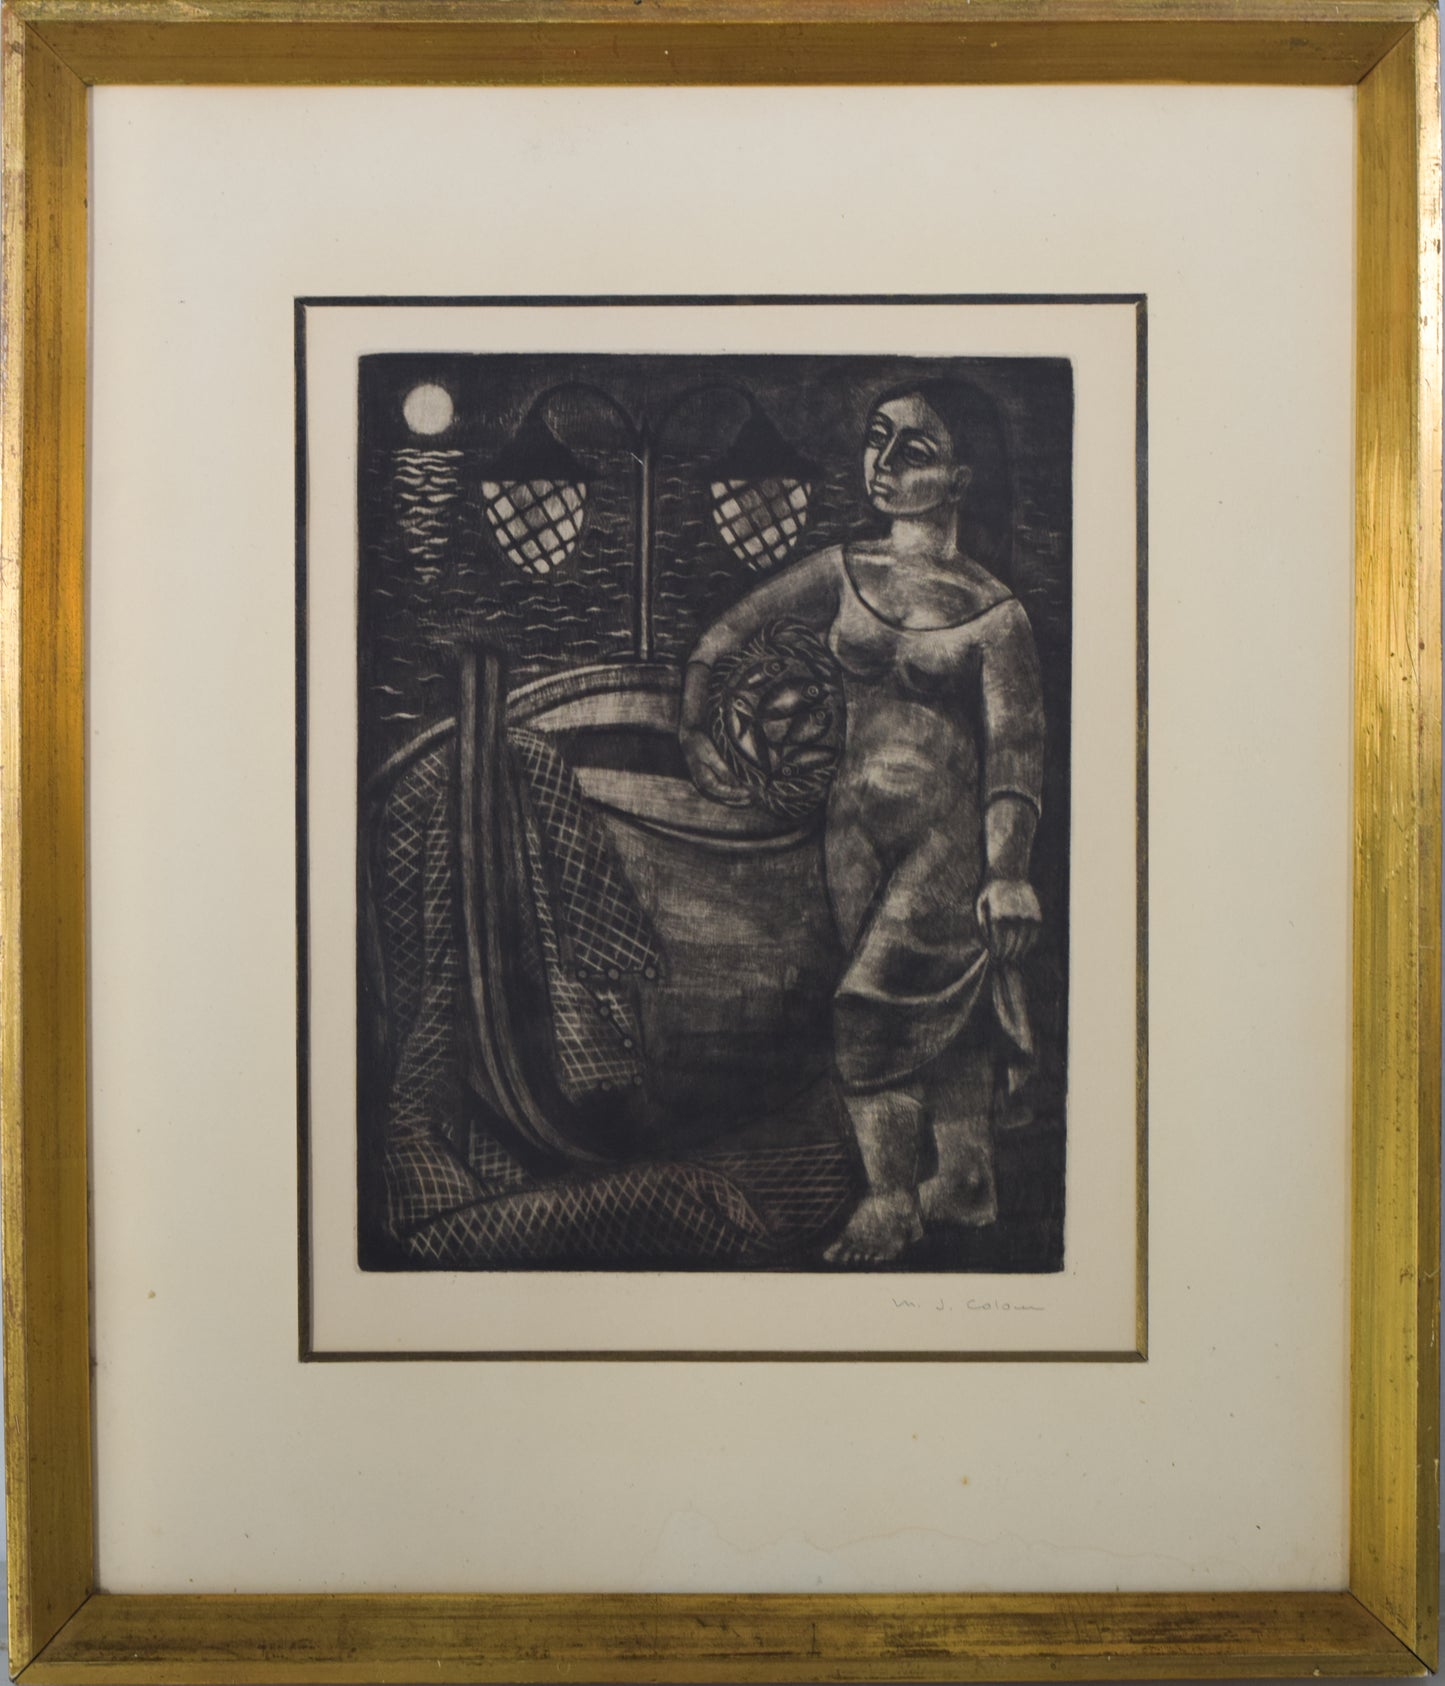 3 Lithographs with images of a Woman by Maria Josefa Colom